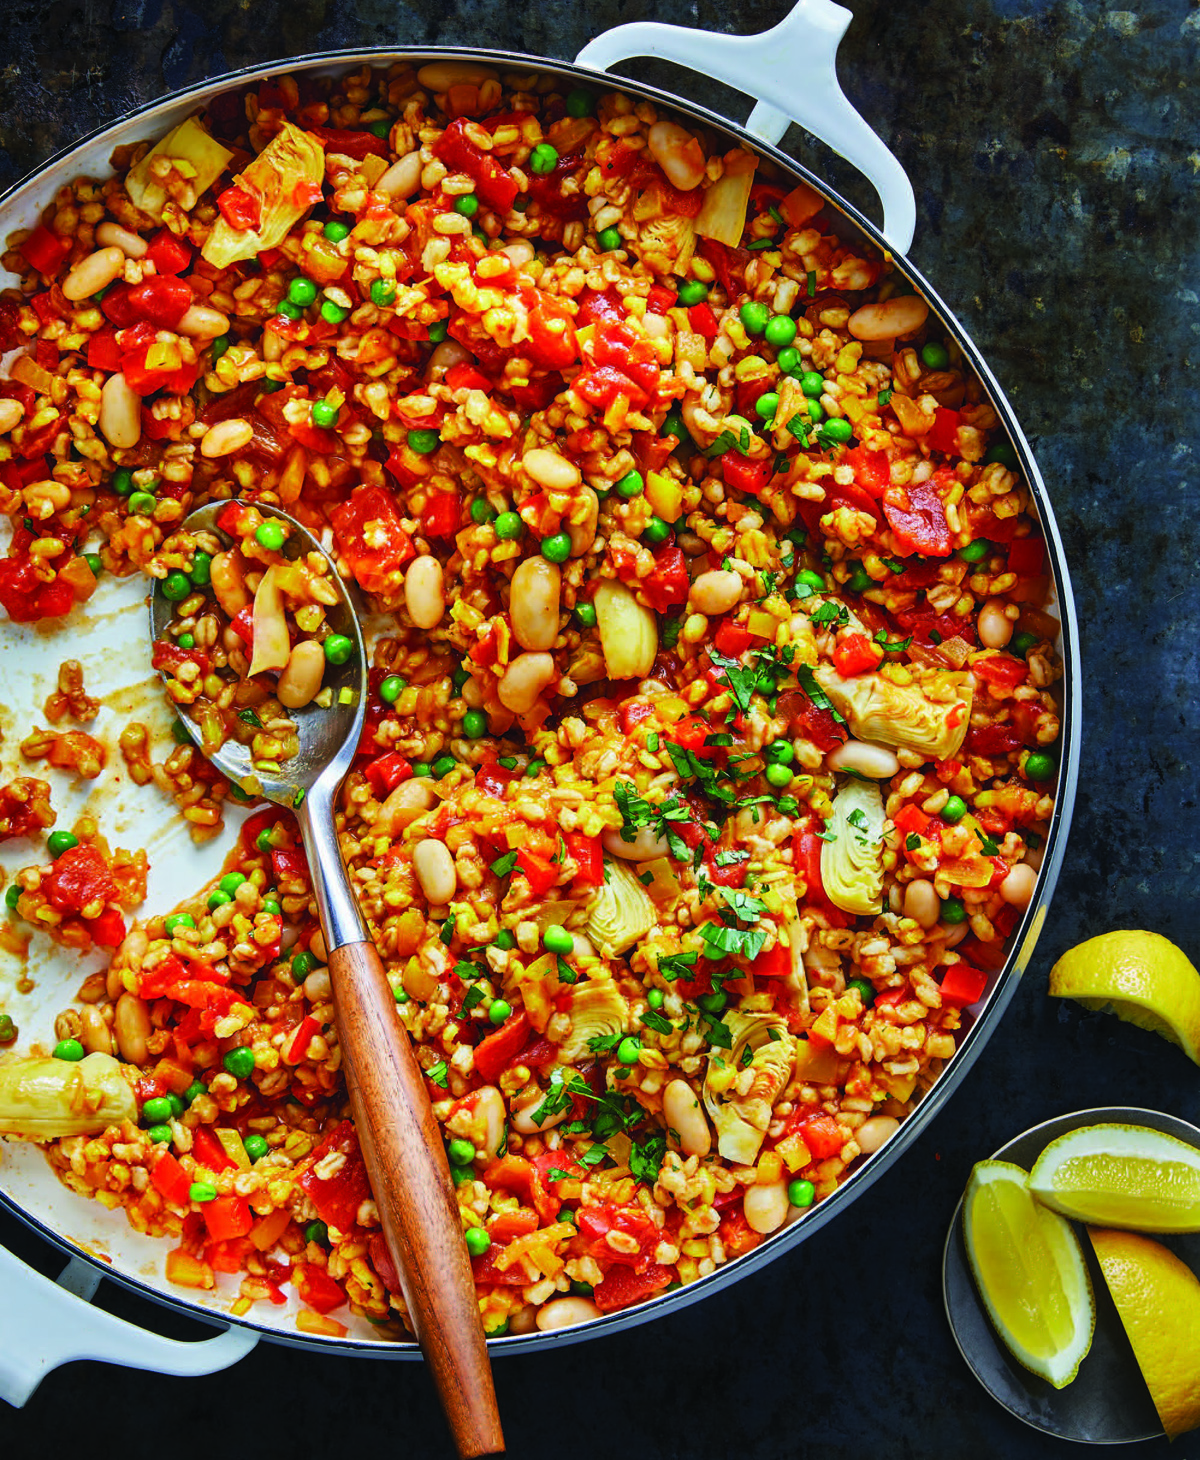 Vegetable Paella with Golden Barley